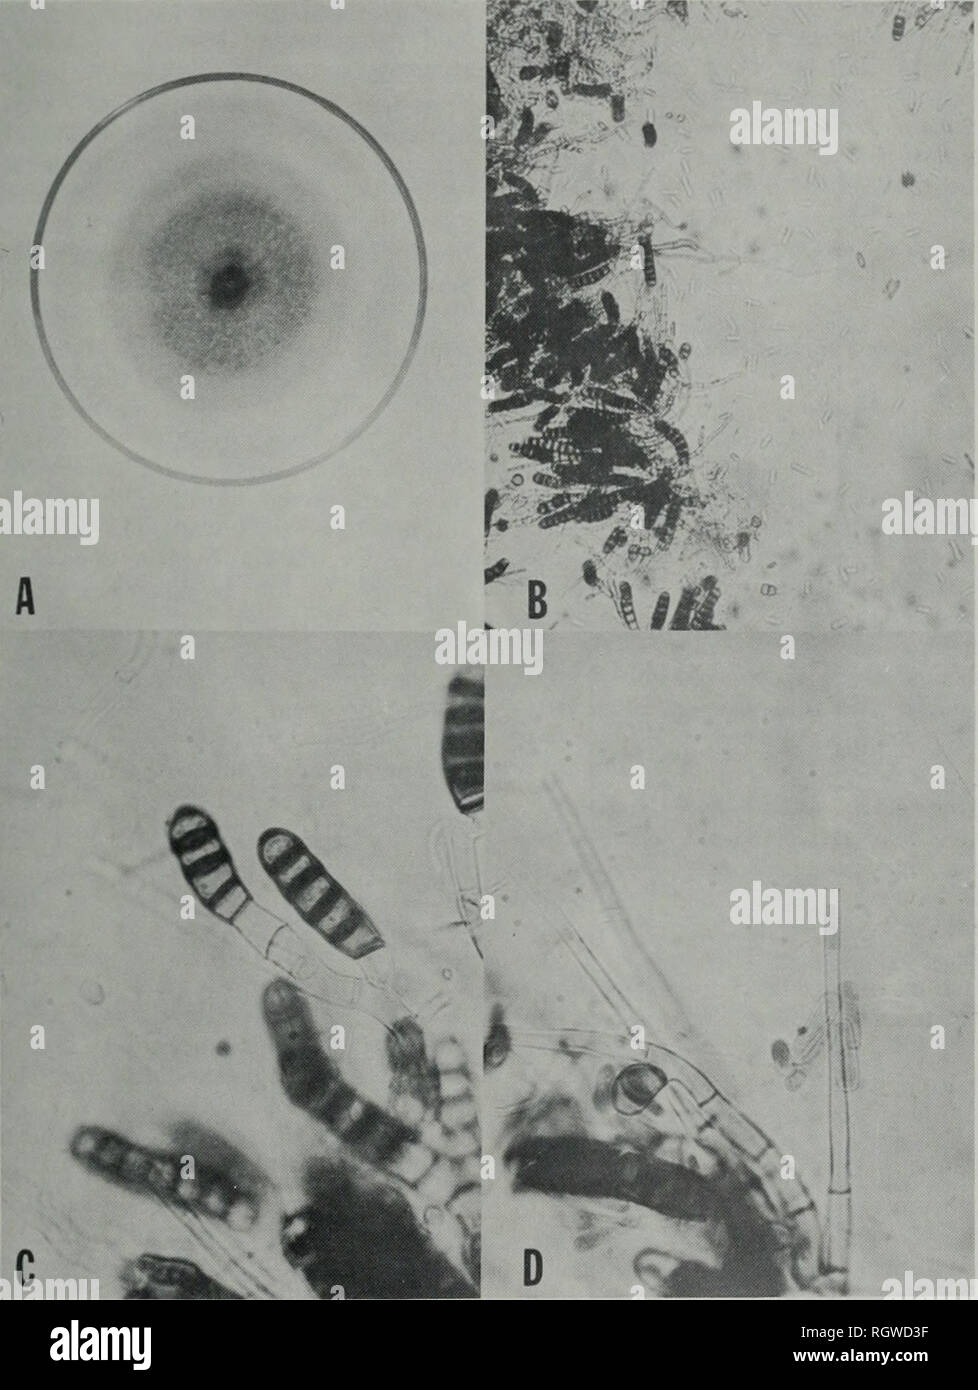 . Bulletin. Natural history; Natural history. Aug., 1971 Pehhy: Two Components of Poinsettia Root Rot 427. Fig. 1, — Thiehviopiii basicolo: A, 10-day-old colony on V-8 juice agar; B, colony components — two kinds of spores and two types of mycelia (X 130); C, chlomydospore cfioins (X 520); and D, endoconidiopfiores with endoconidio (X 520). were produced individually or in arise from a common point but from clusters on terminal tips of hyphae or various subbasal, hyphal cells, on stubby lateral branches. Endoco- Conidia were produced endogenously nidiophores produced in clusters were by the ph Stock Photo